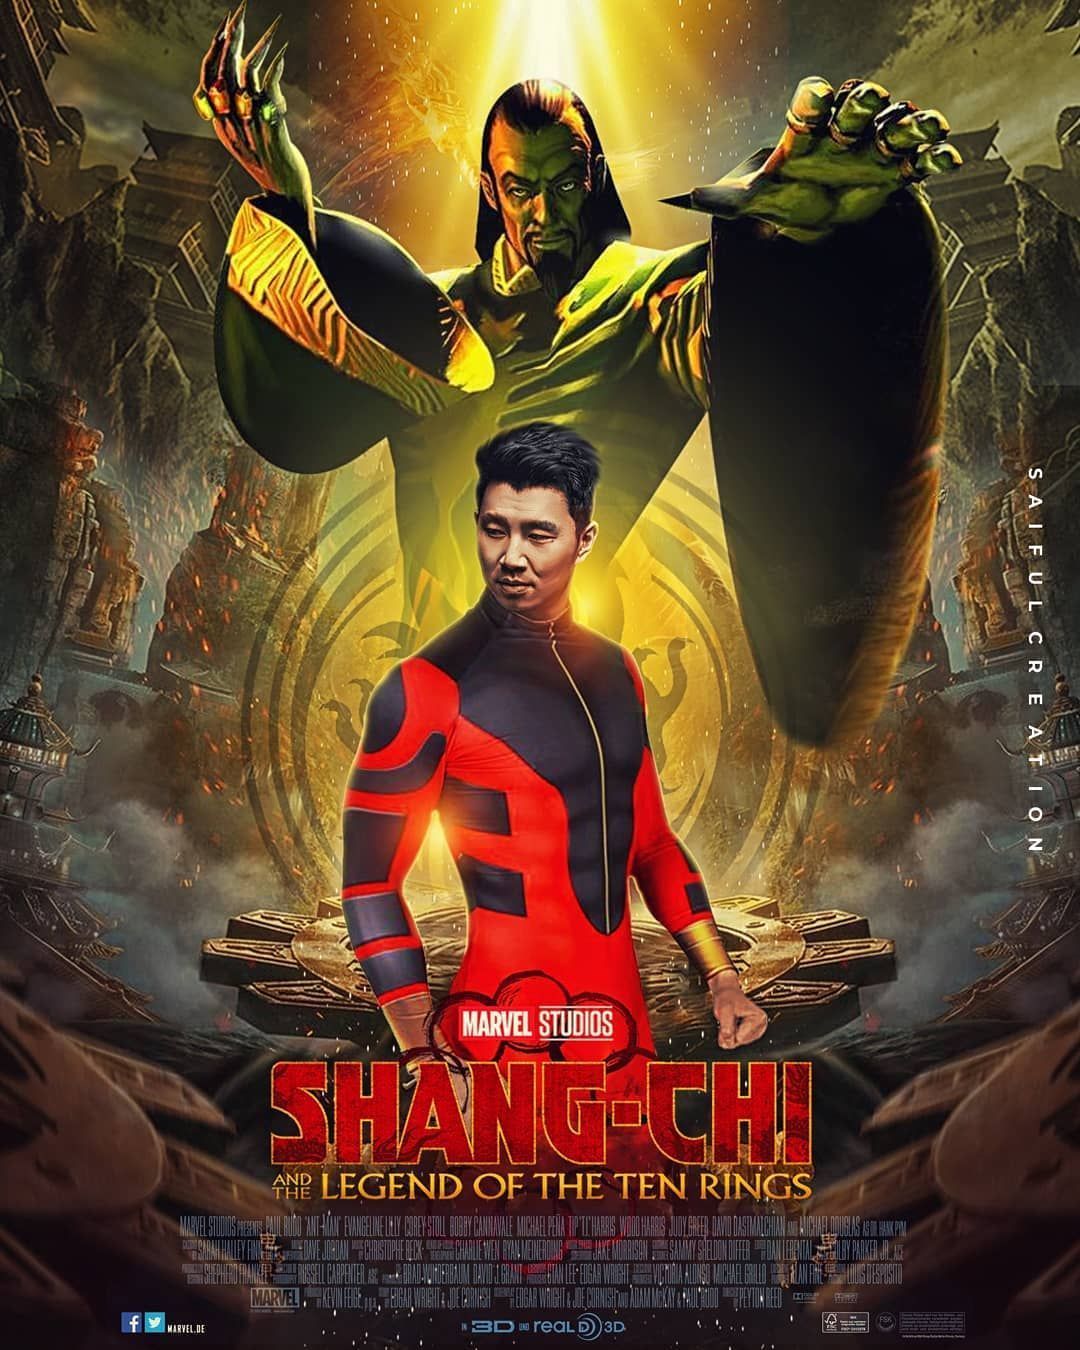 DOWNLOAD MOBILE WALLPAPERS INSPIRED BY MARVEL STUDIOS SHANGCHI AND THE  LEGEND OF THE TEN RINGS